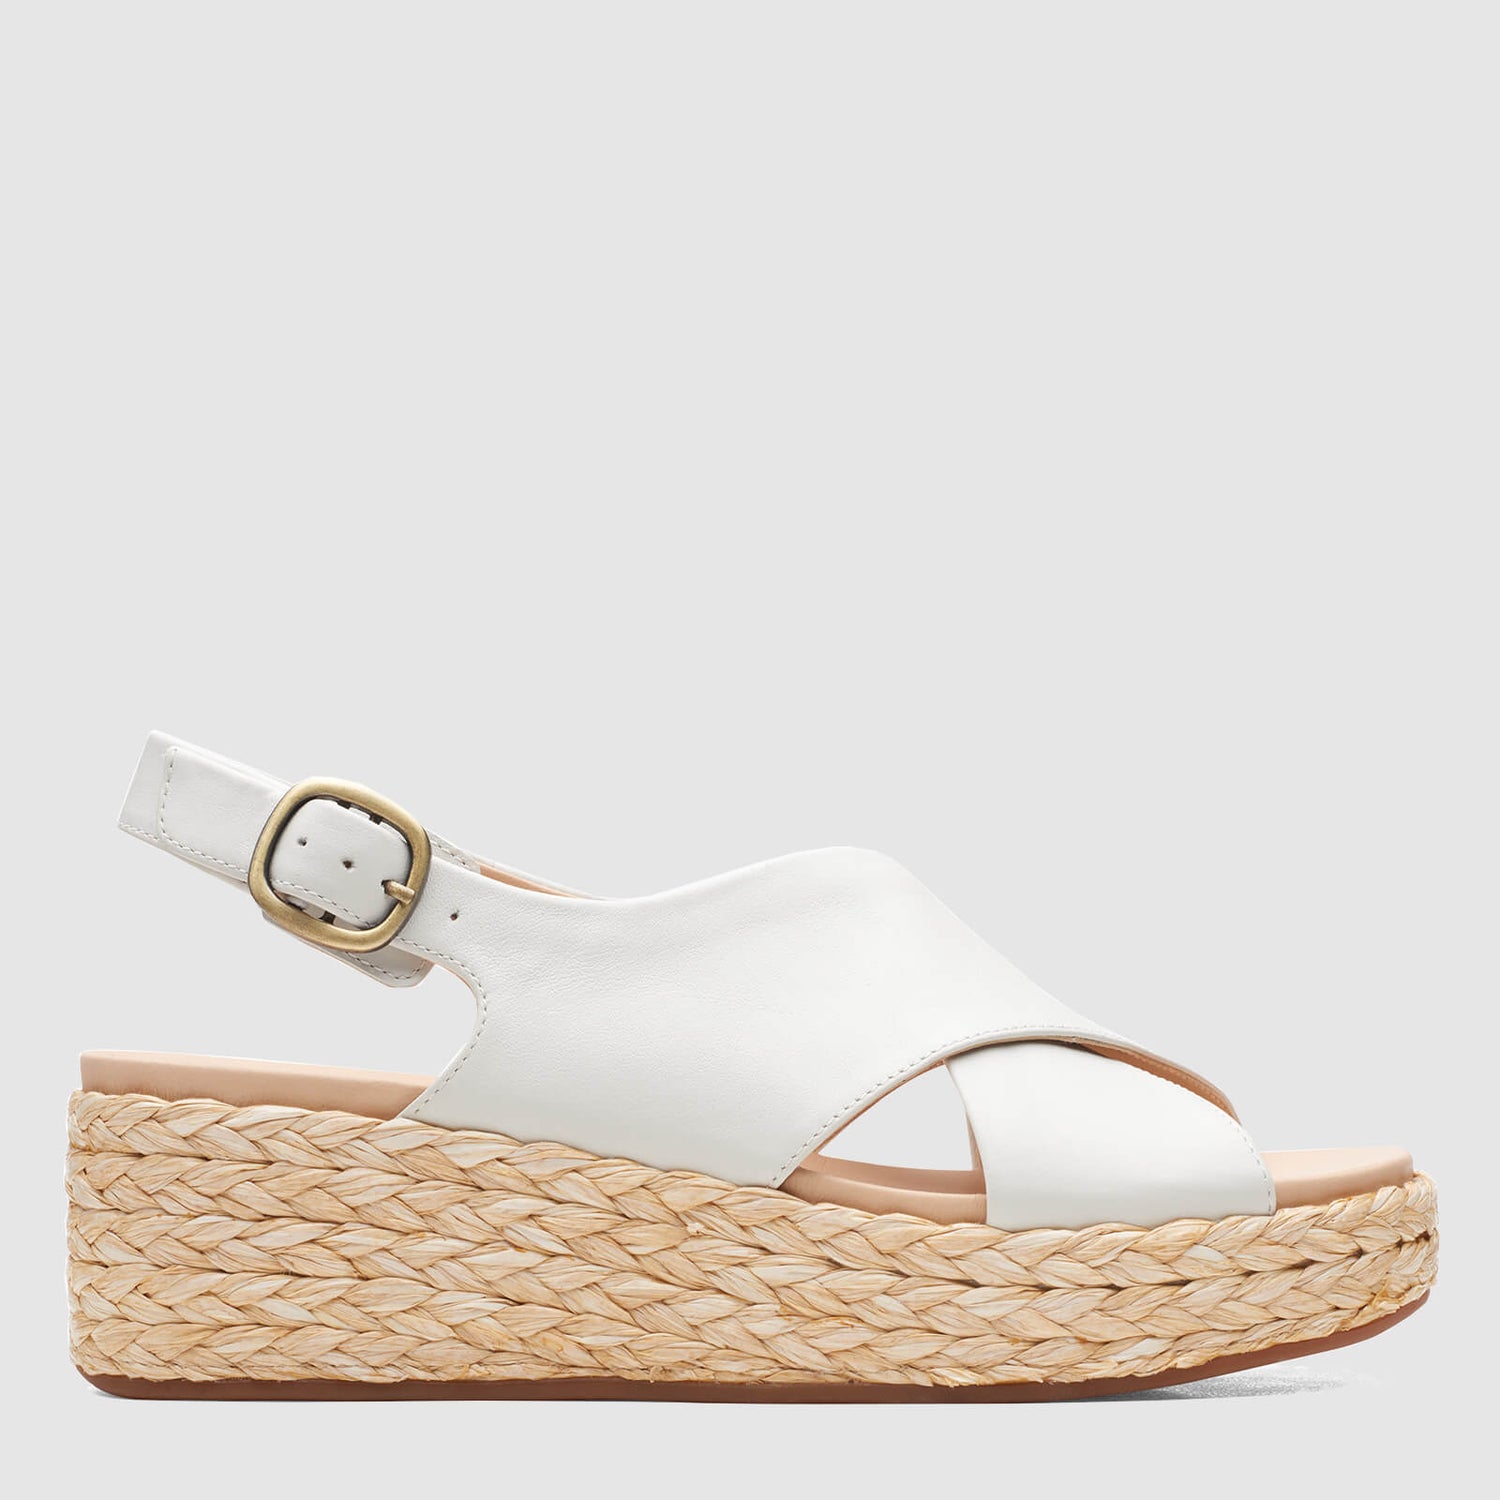 Clarks Women's Kimmei Cross Leather Wedged Sandals - White